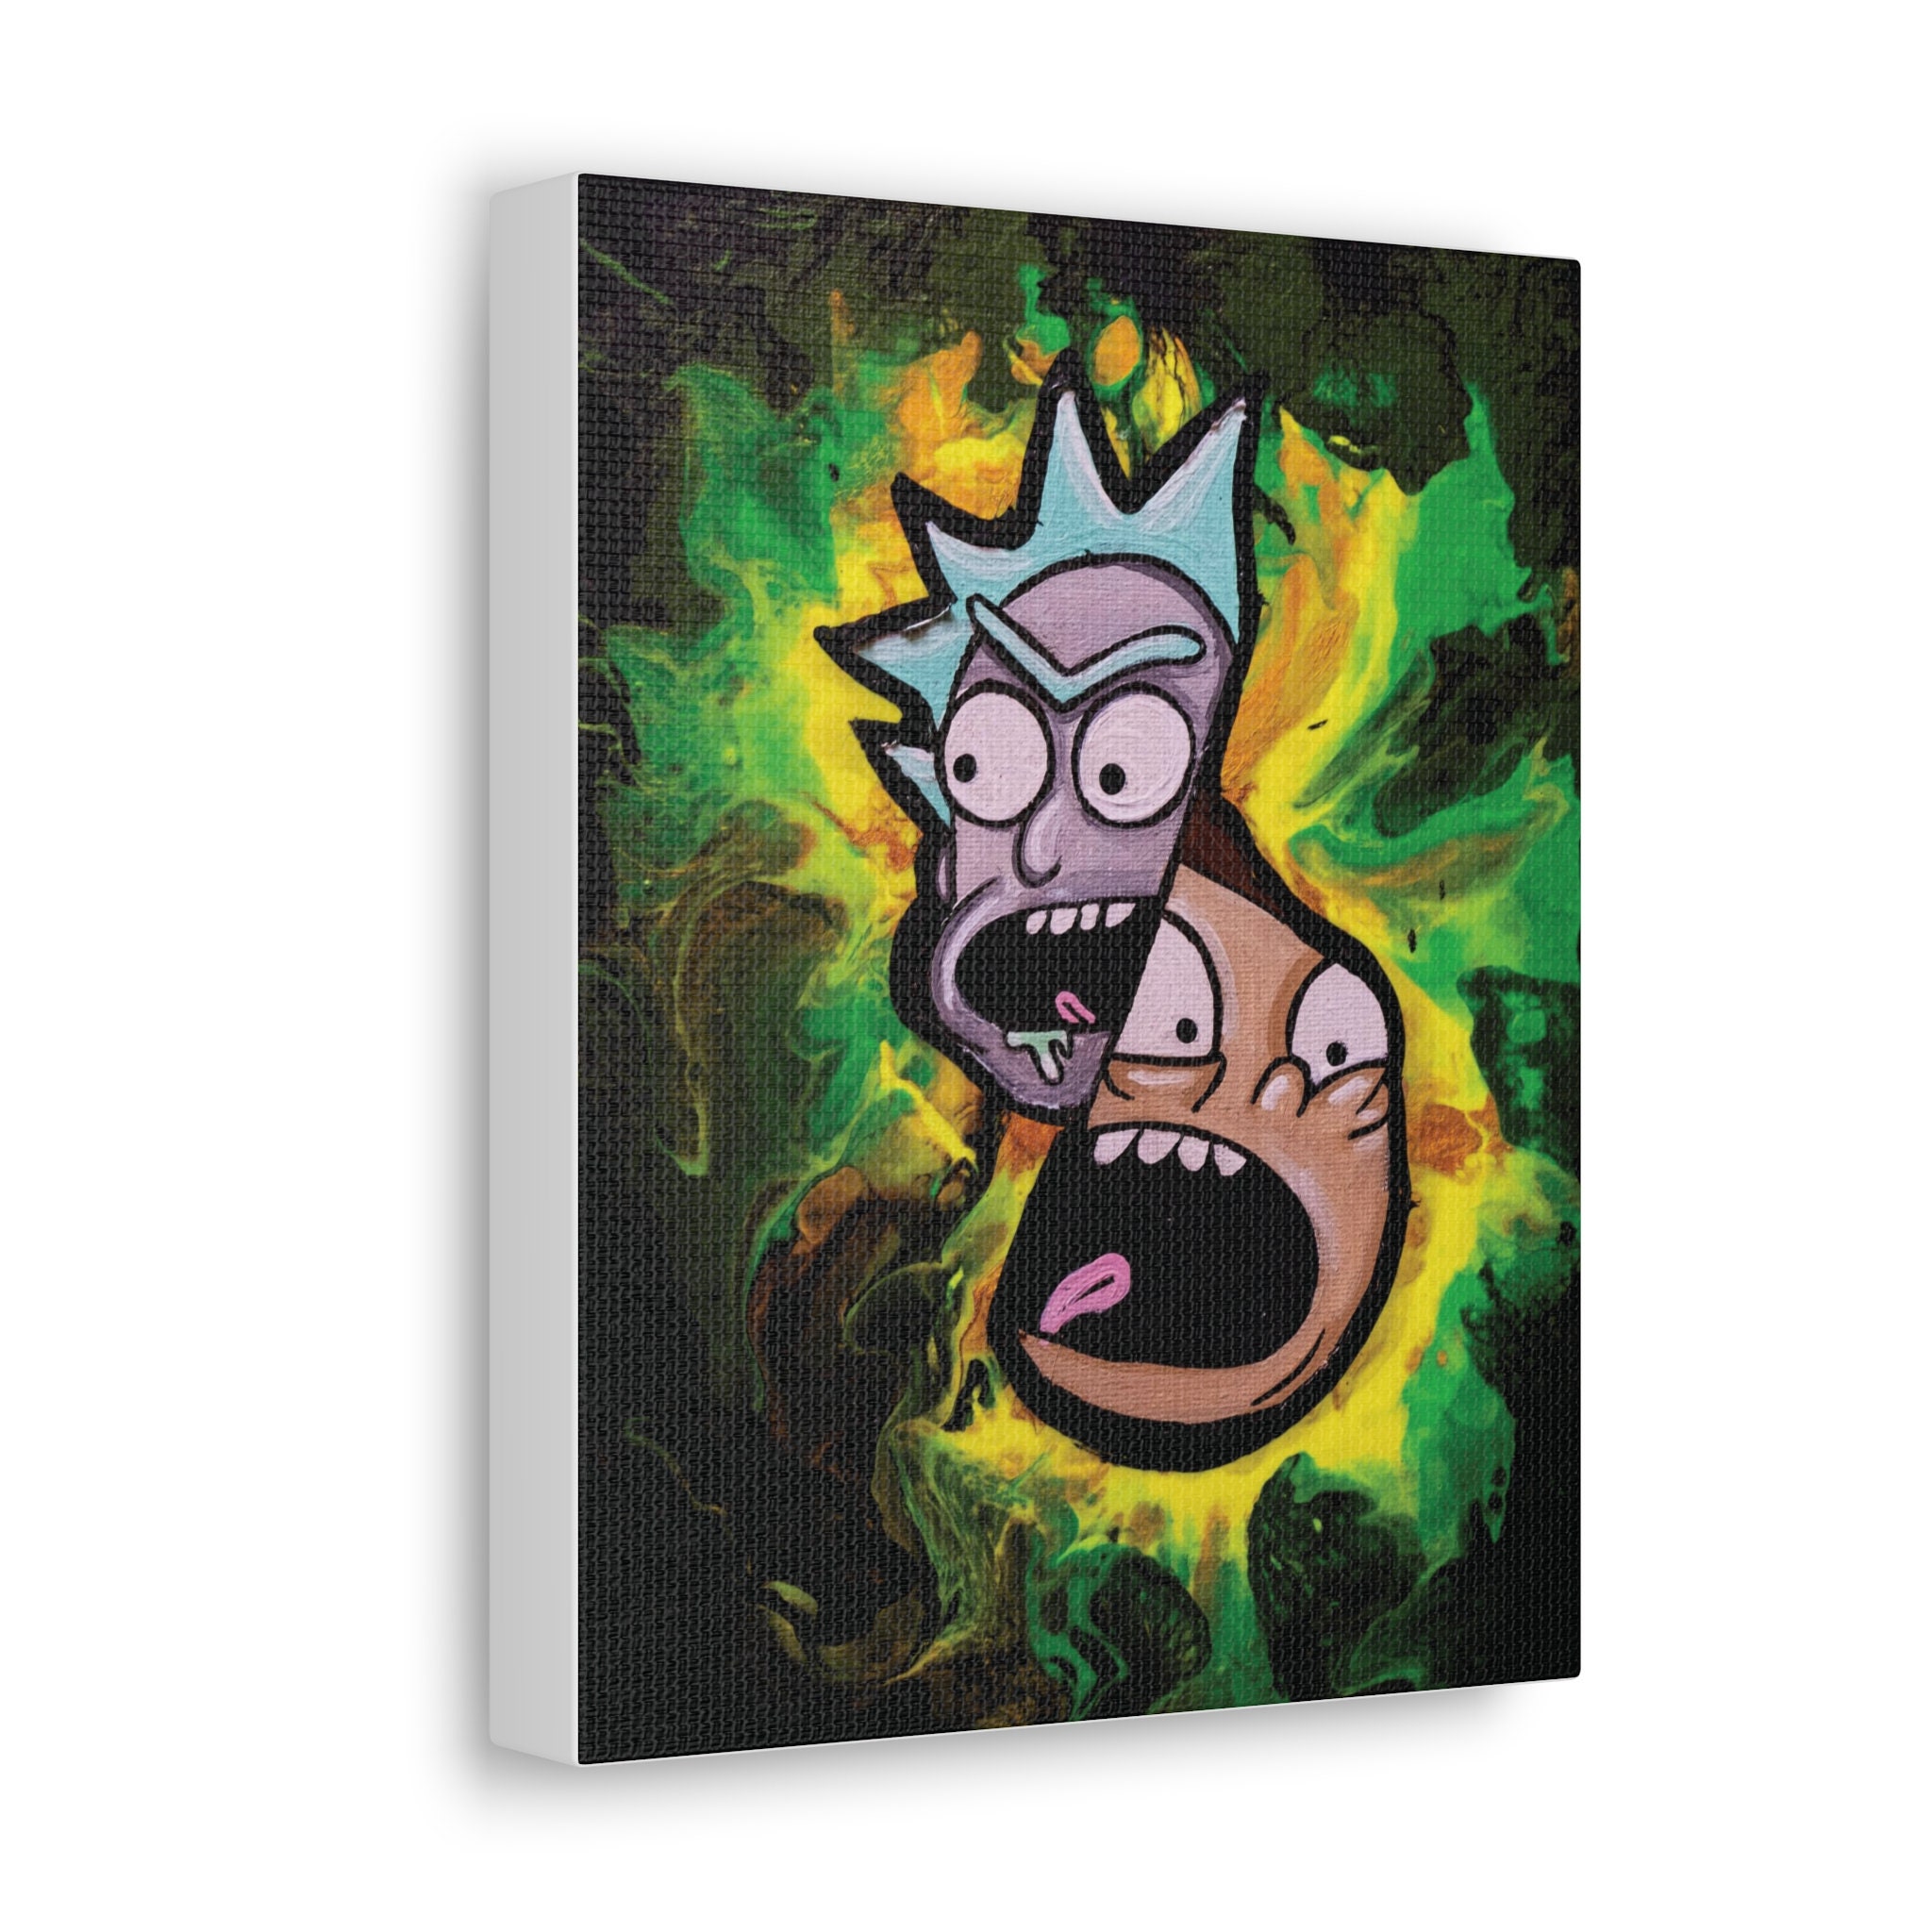 Rick and Morty Season 1 Trading Cards Feature Autos, Sketch Cards